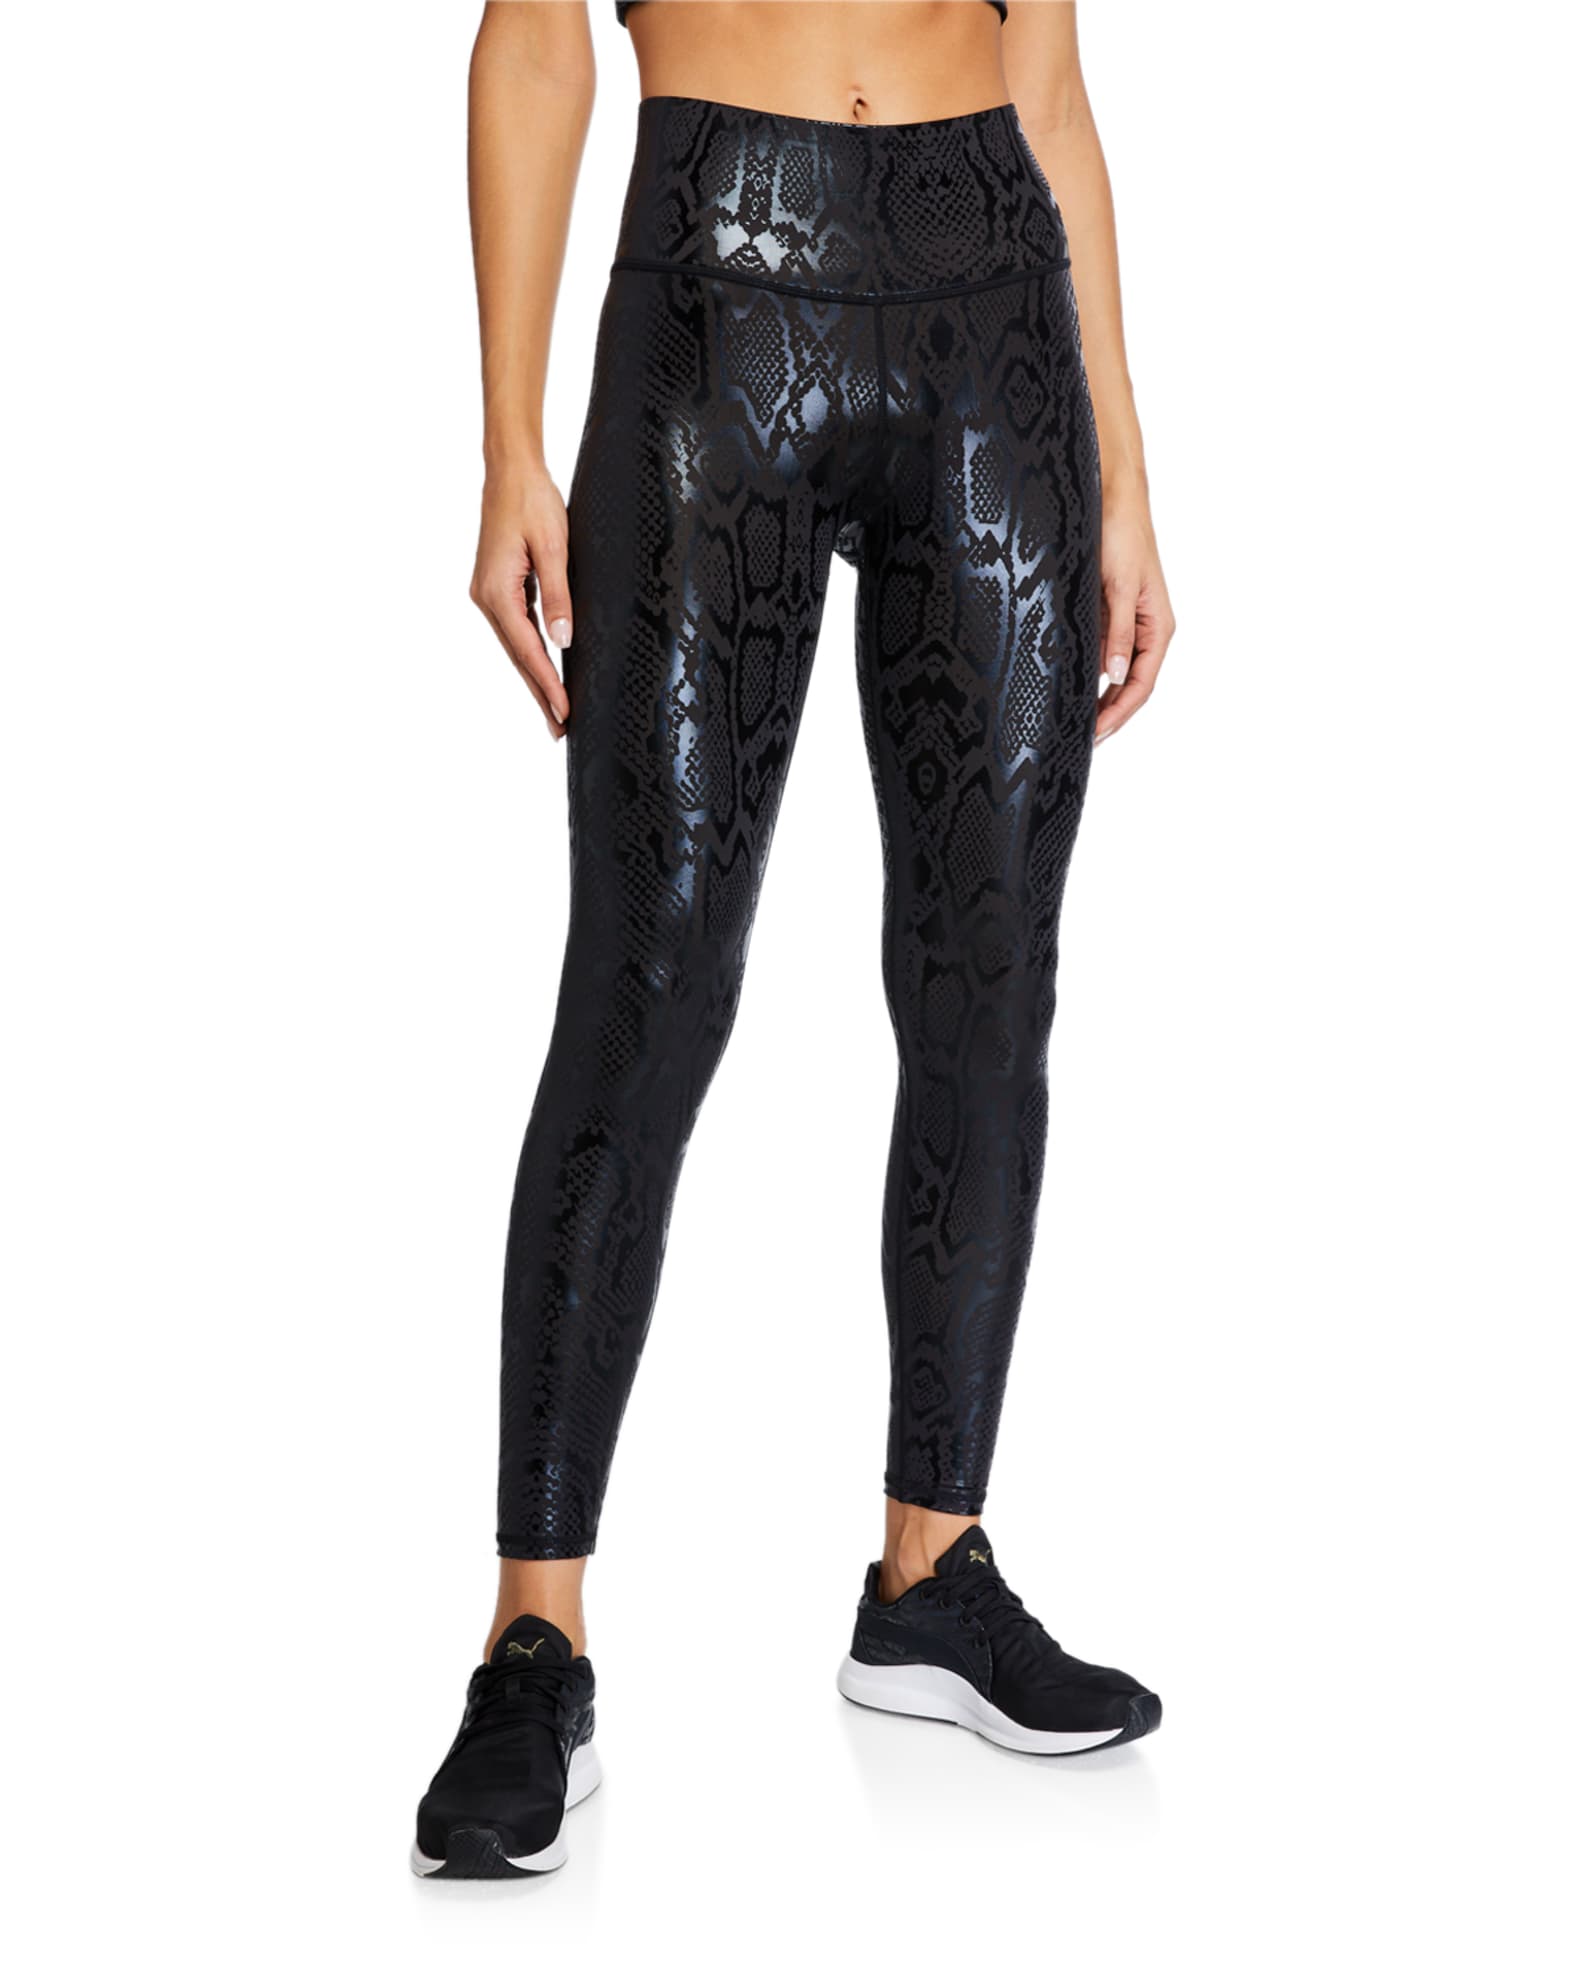 UpLift Leggings in Navy Rainbow Star Foil with Super-High Band –